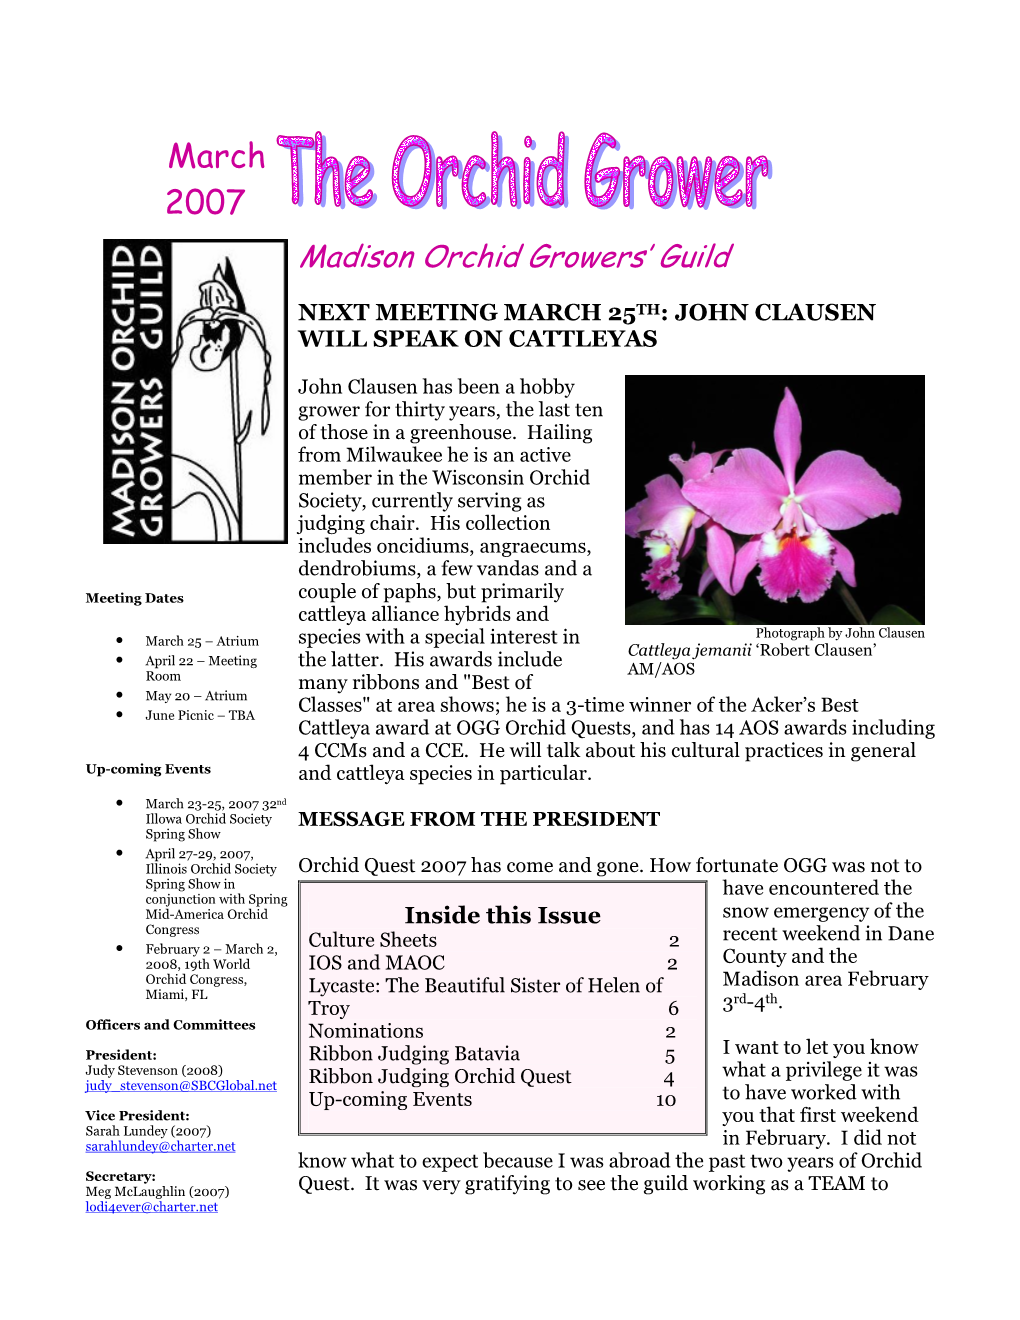 March 2007 Madison Orchid Growers’ Guild